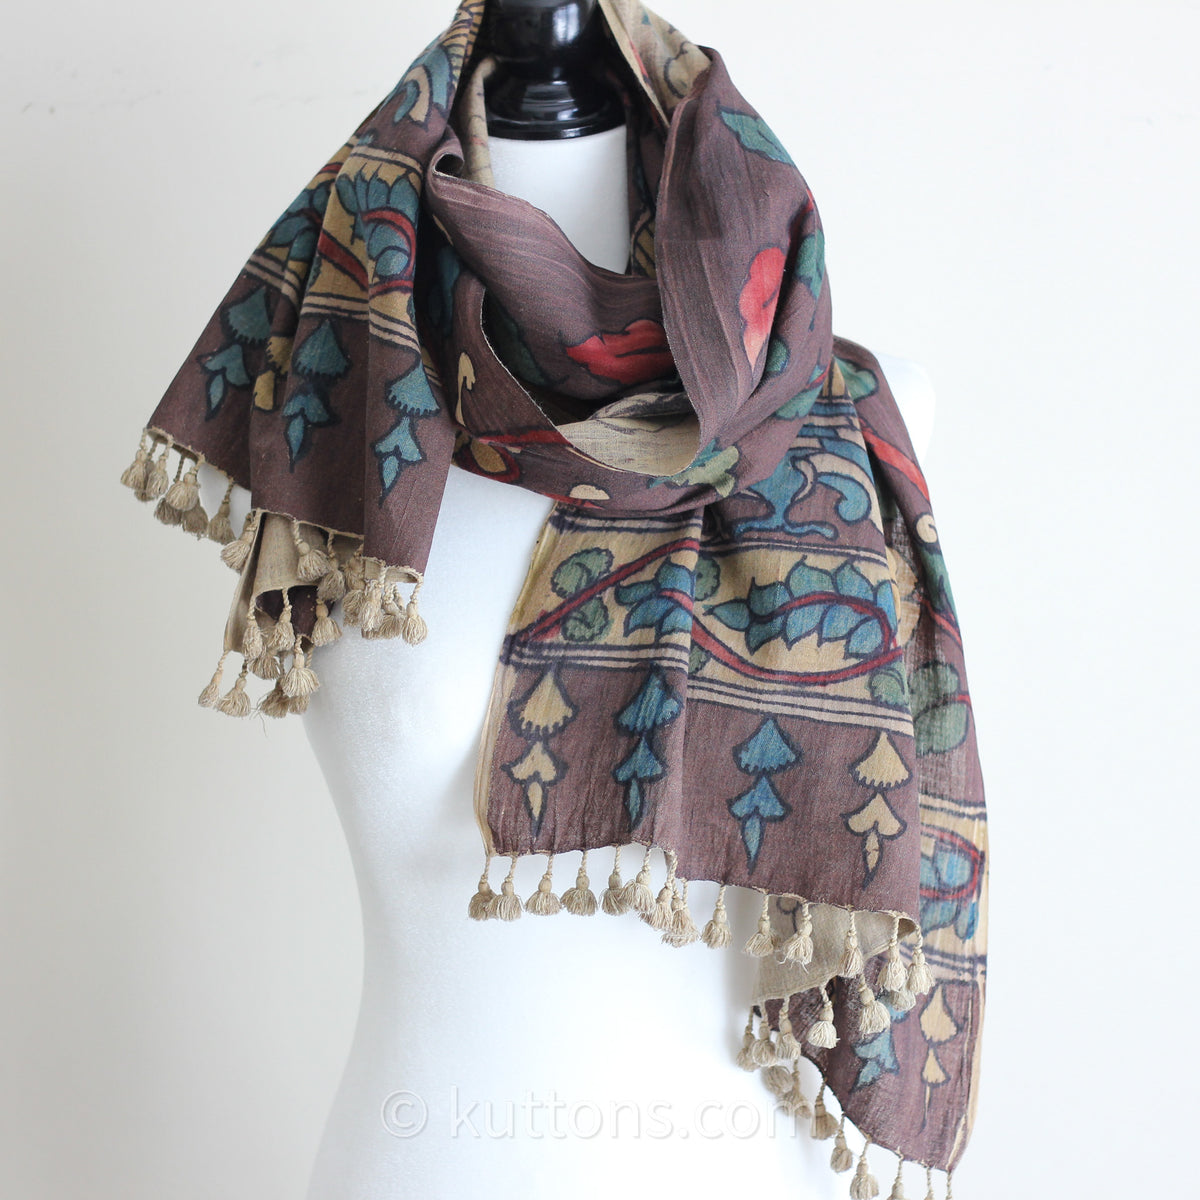 Naturally Hand-Painted Kalamkari Organic Cotton Scarf - Ethnic Stole from Natural Dyes | Brown, 23x86"